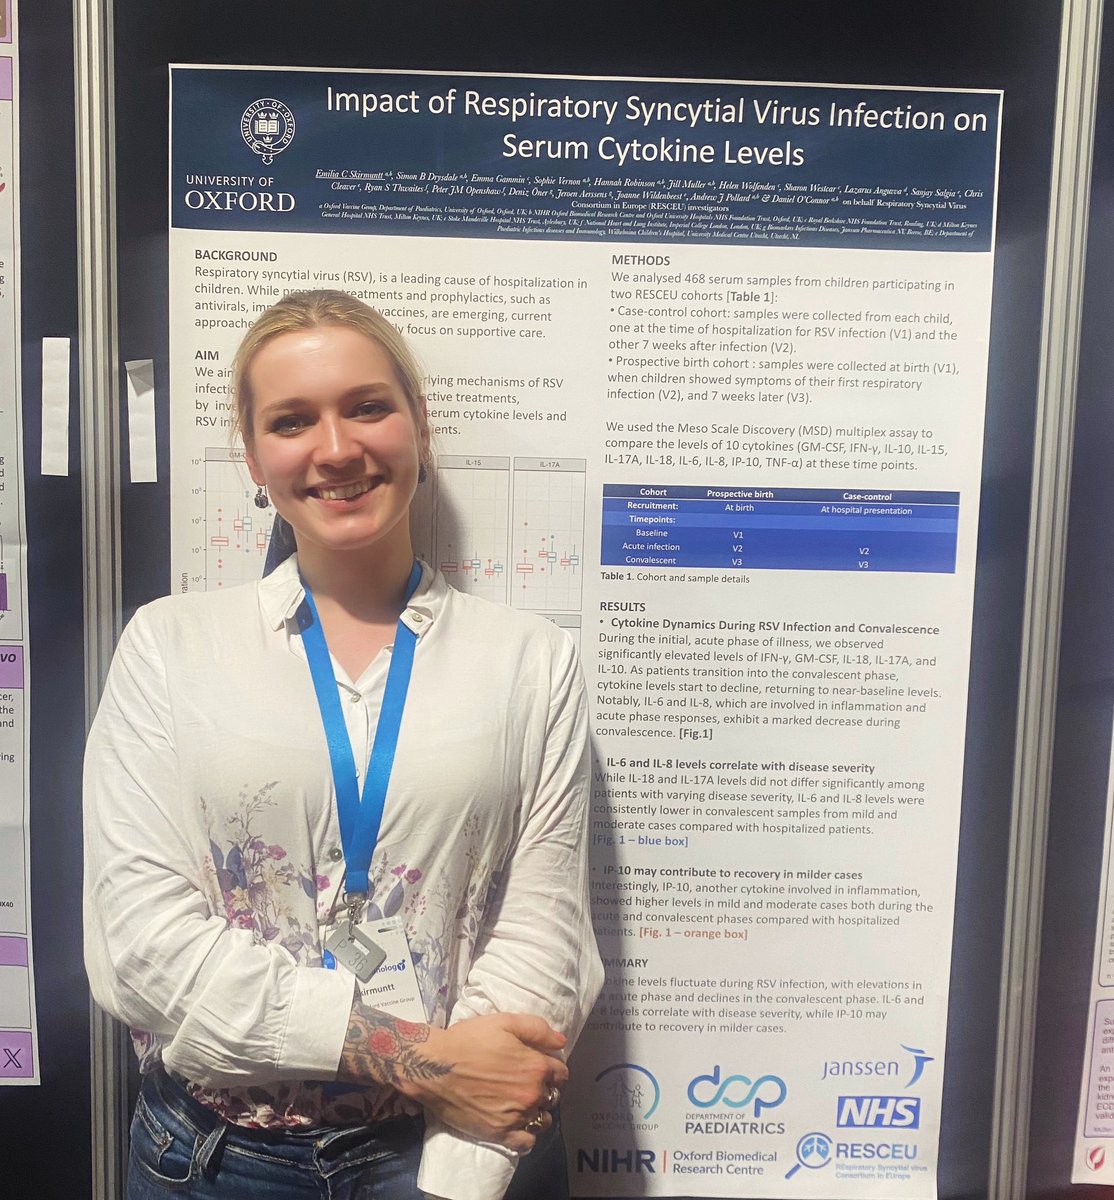 With my poster describing our findings on cytokine levels in RSV infections in paediatric patients. #BSI23 #conference #science #scientist #virologist #virology #womeninstem @OxPaediatrics @OxfordVacGroup